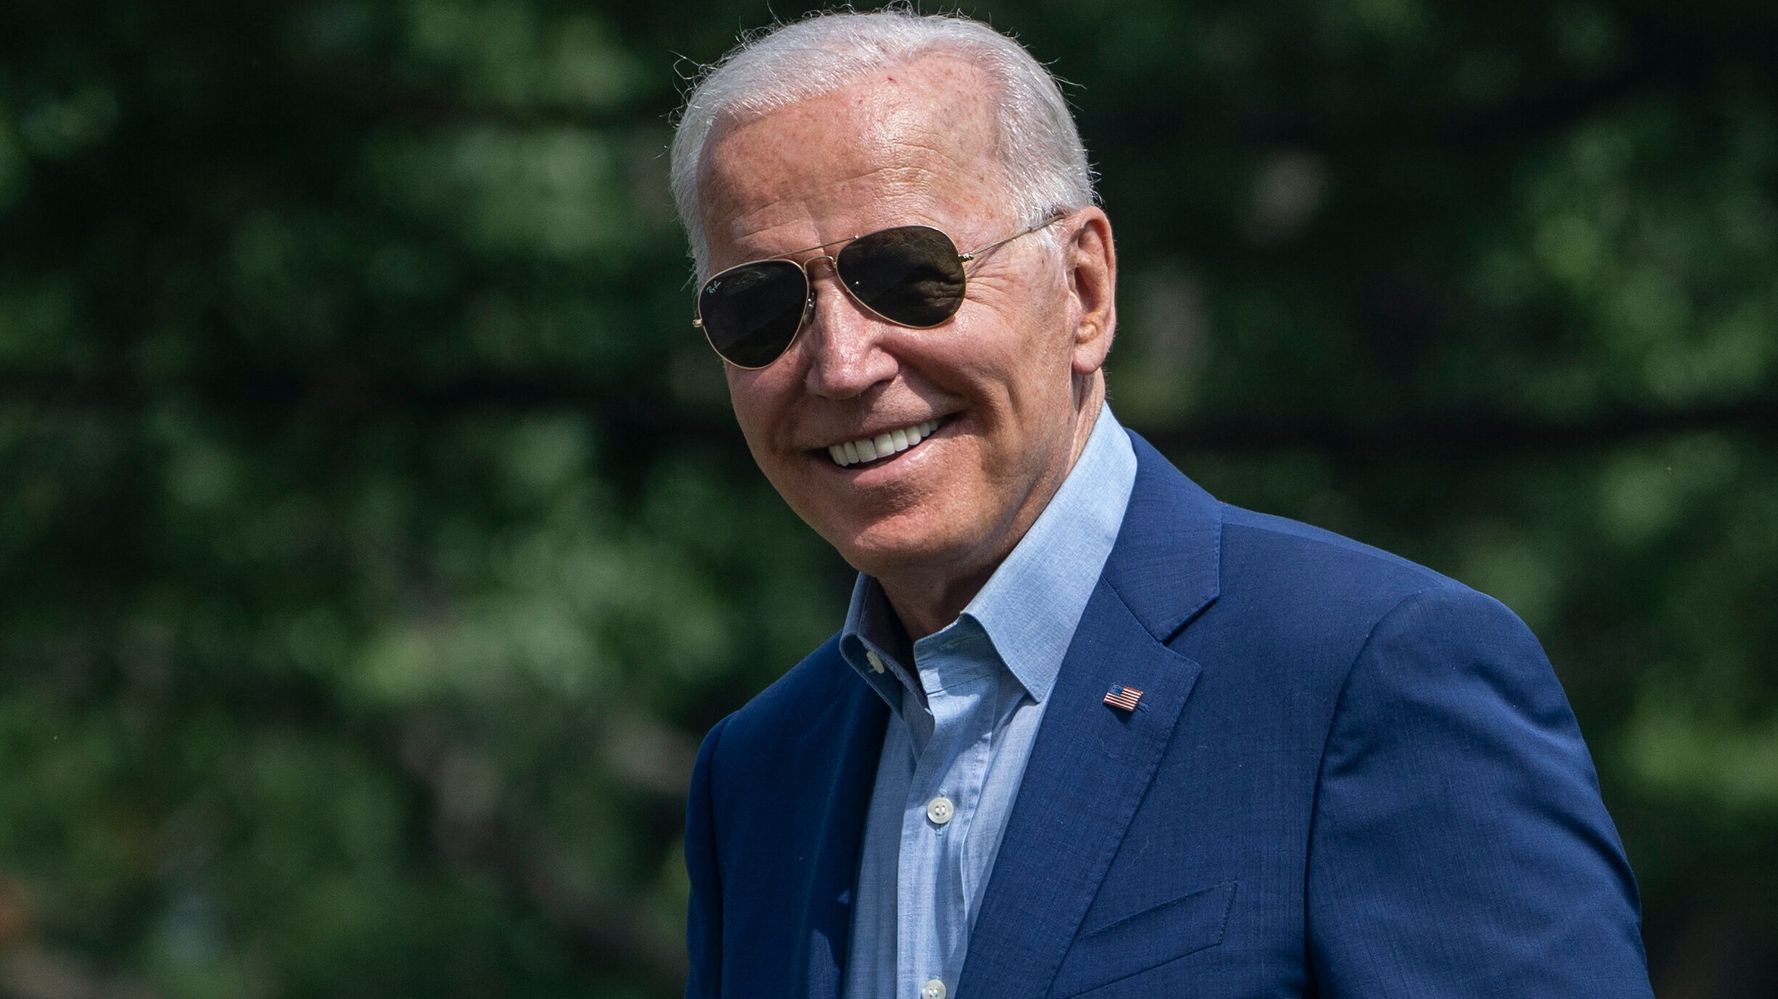 Biden Calls On States To Give $100 To Every Newly Vaccinated Person